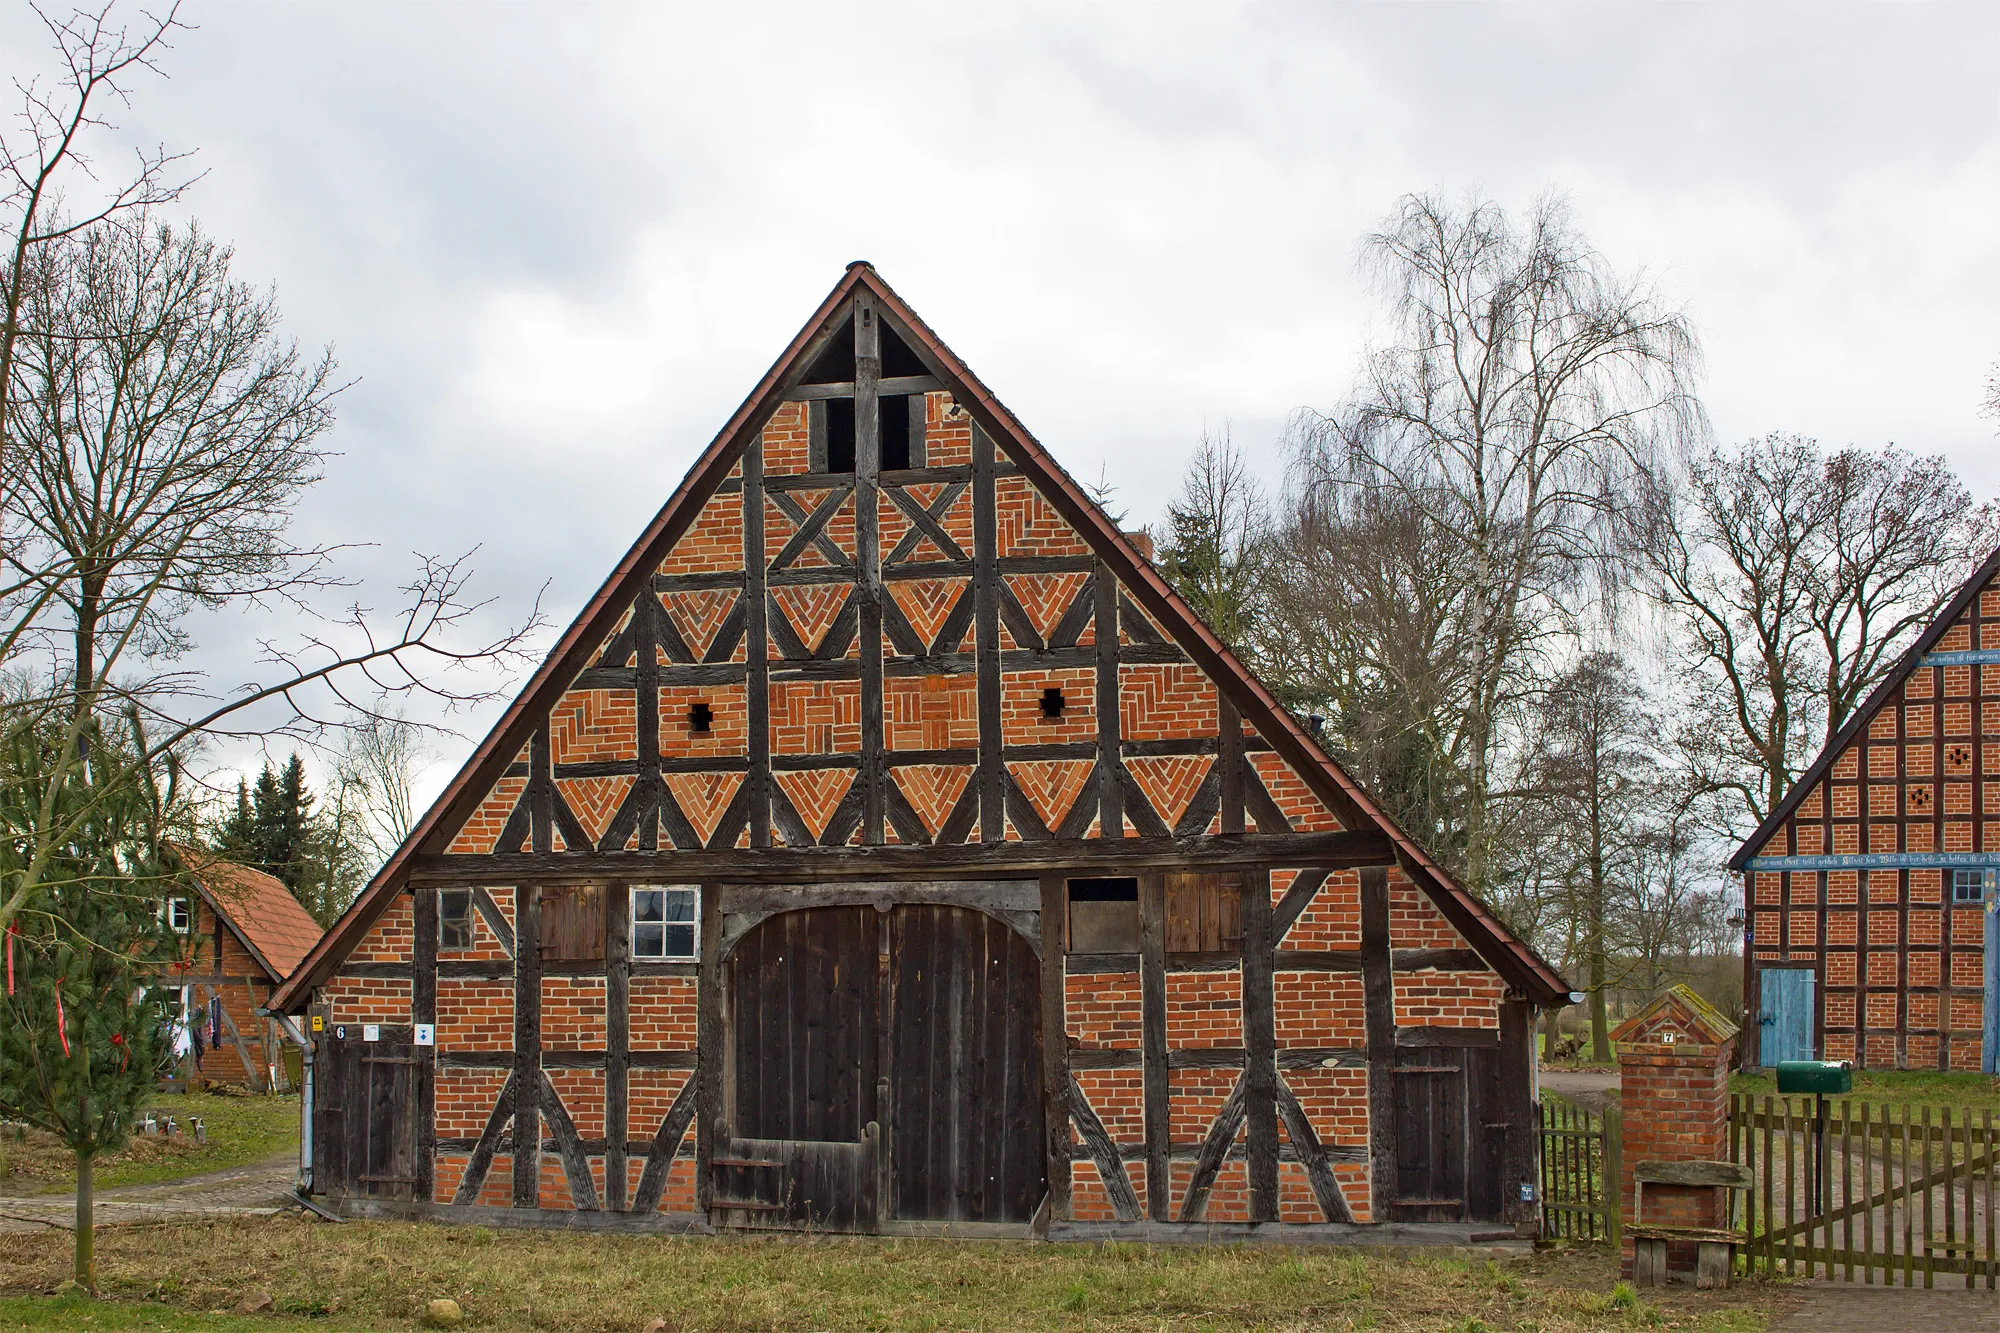 Photo showing: Cultural heritage monument "No 6" in the village Weitsche near Lüchow (district Lüchow-Dannenberg, northern Germany); built in 1716.